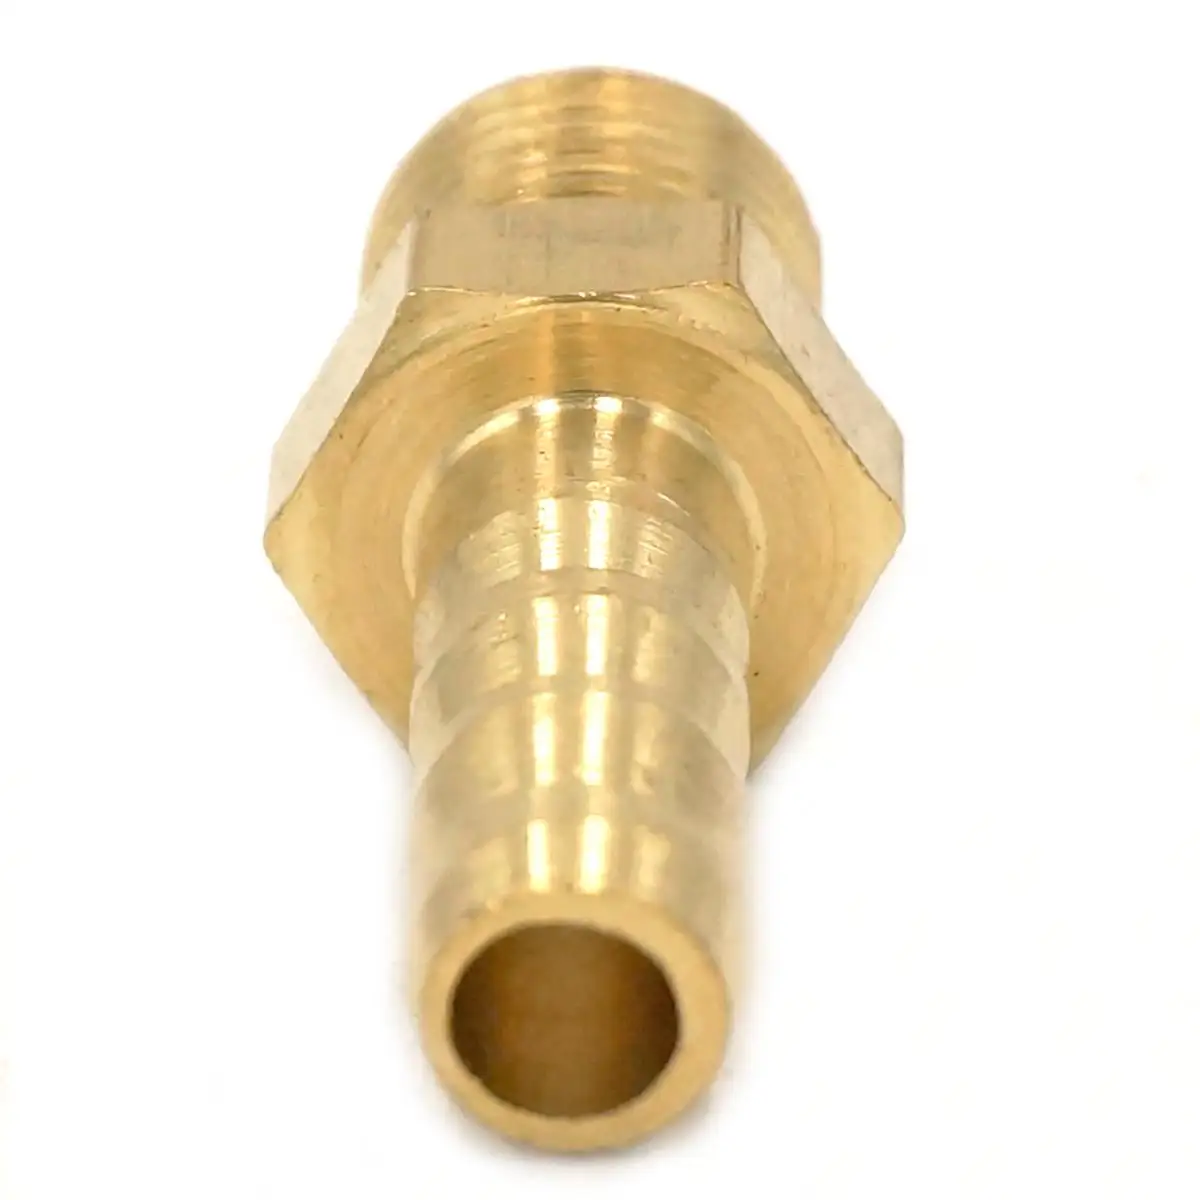 QUAROS LOT 2 Hose Barb I/D 6mm x 1/8 BSP Male Thread Elbow Brass coupler Splicer Connector fitting for Fuel Gas Water 